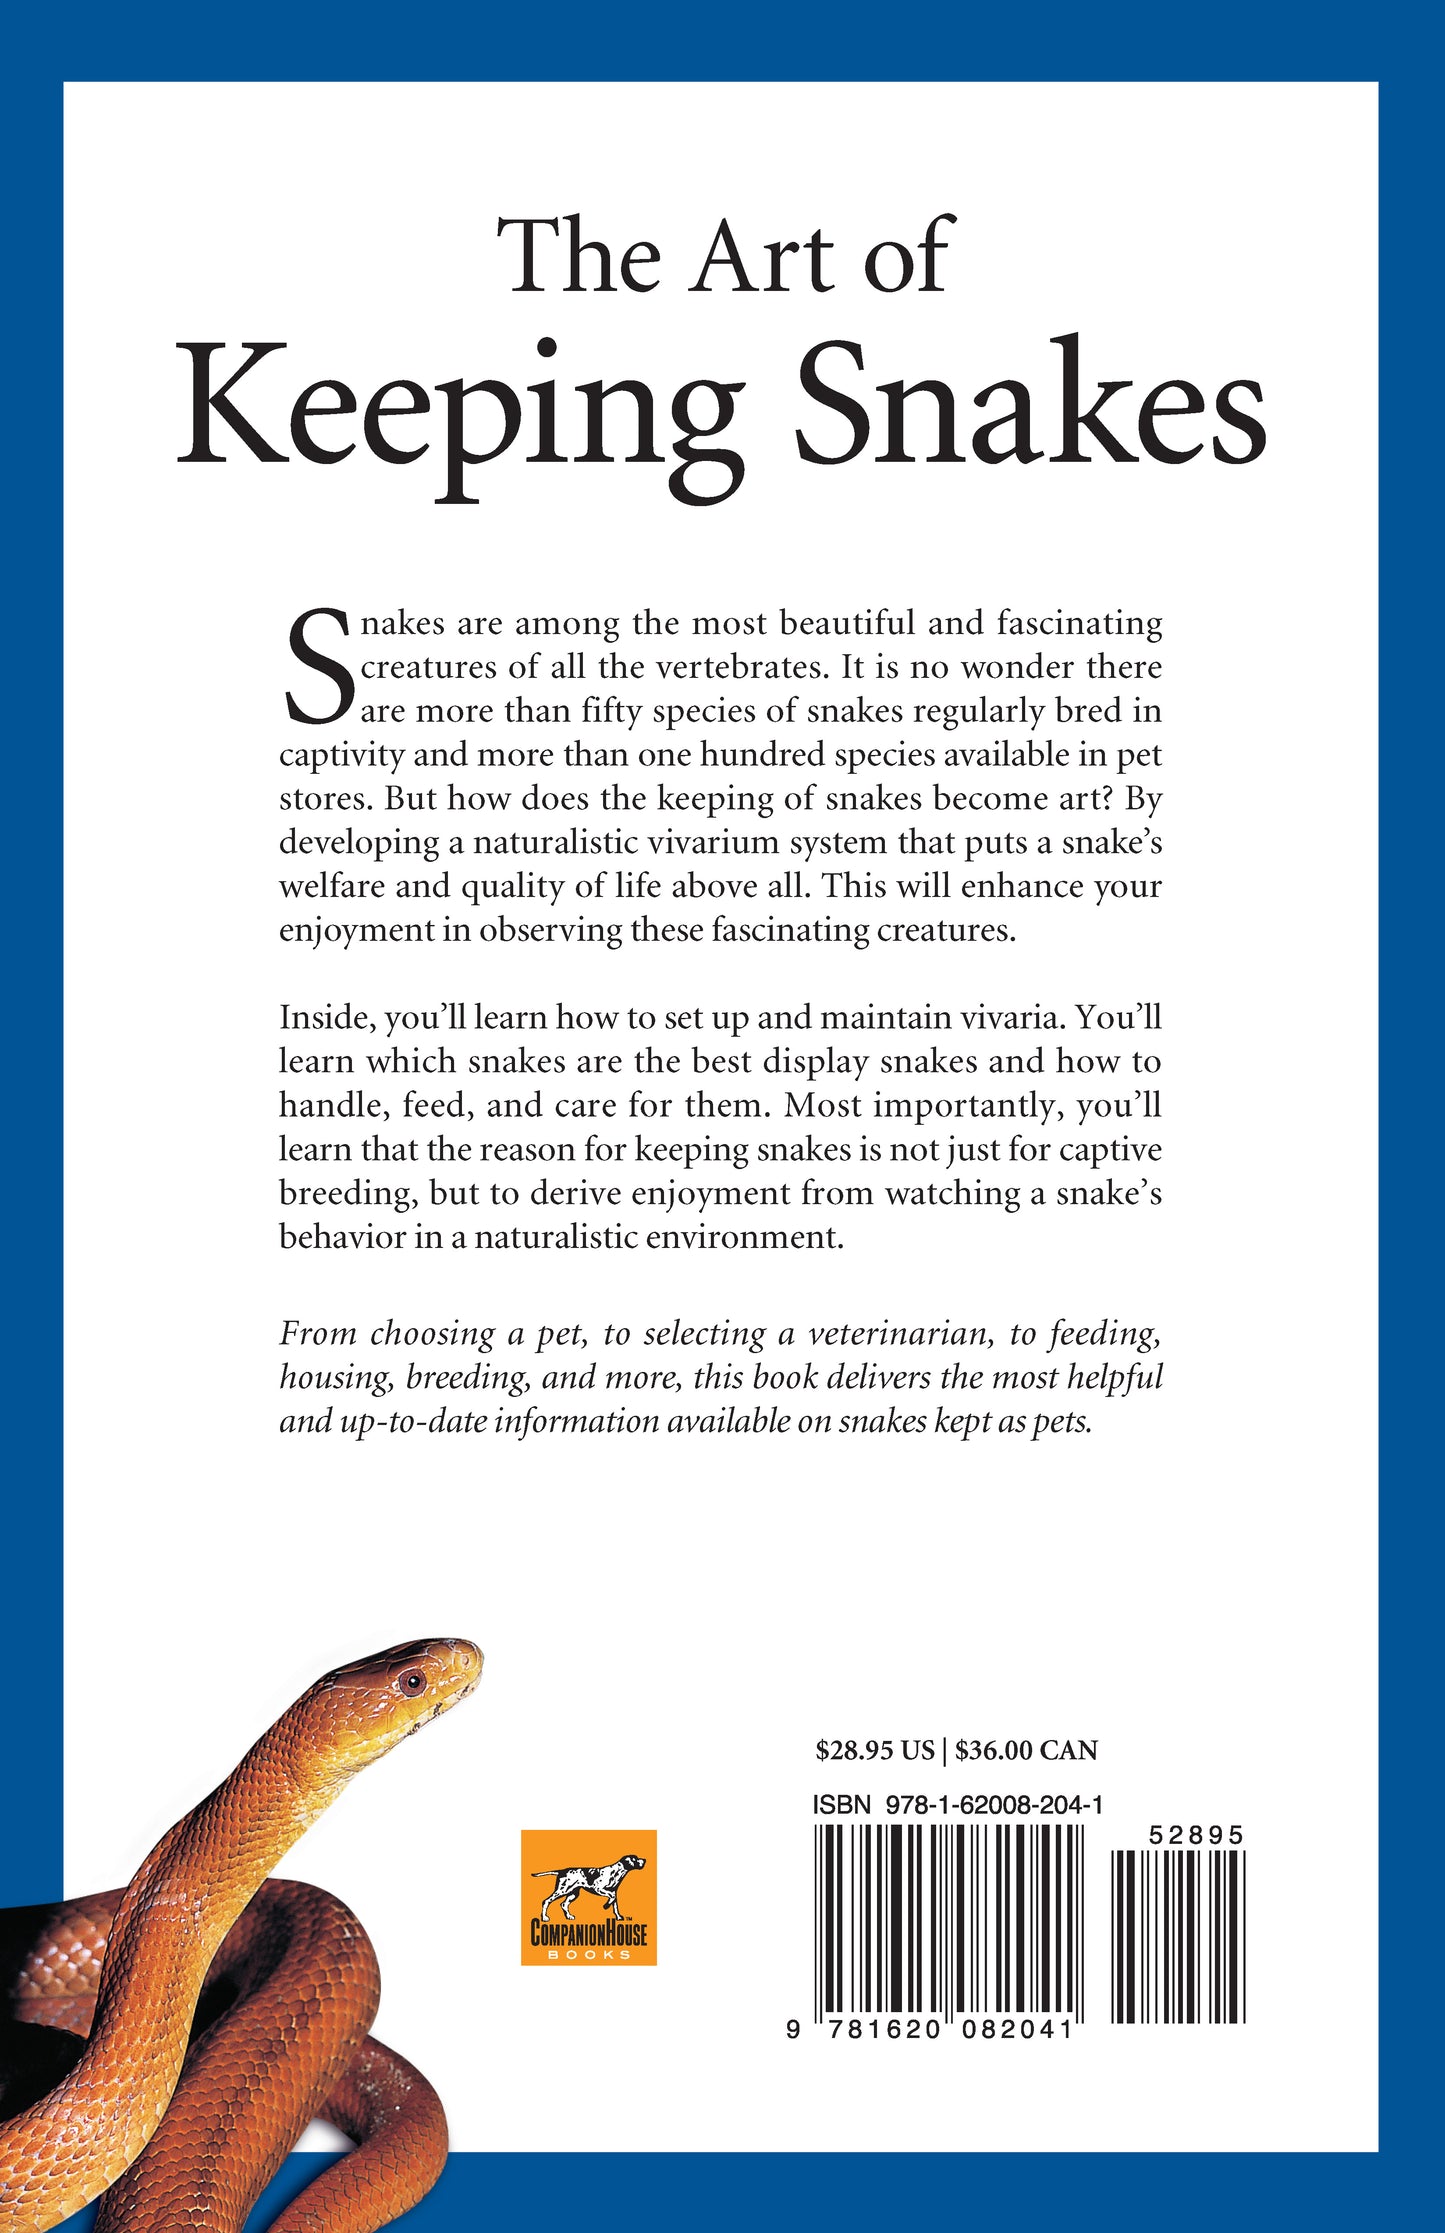 Art of Keeping Snakes